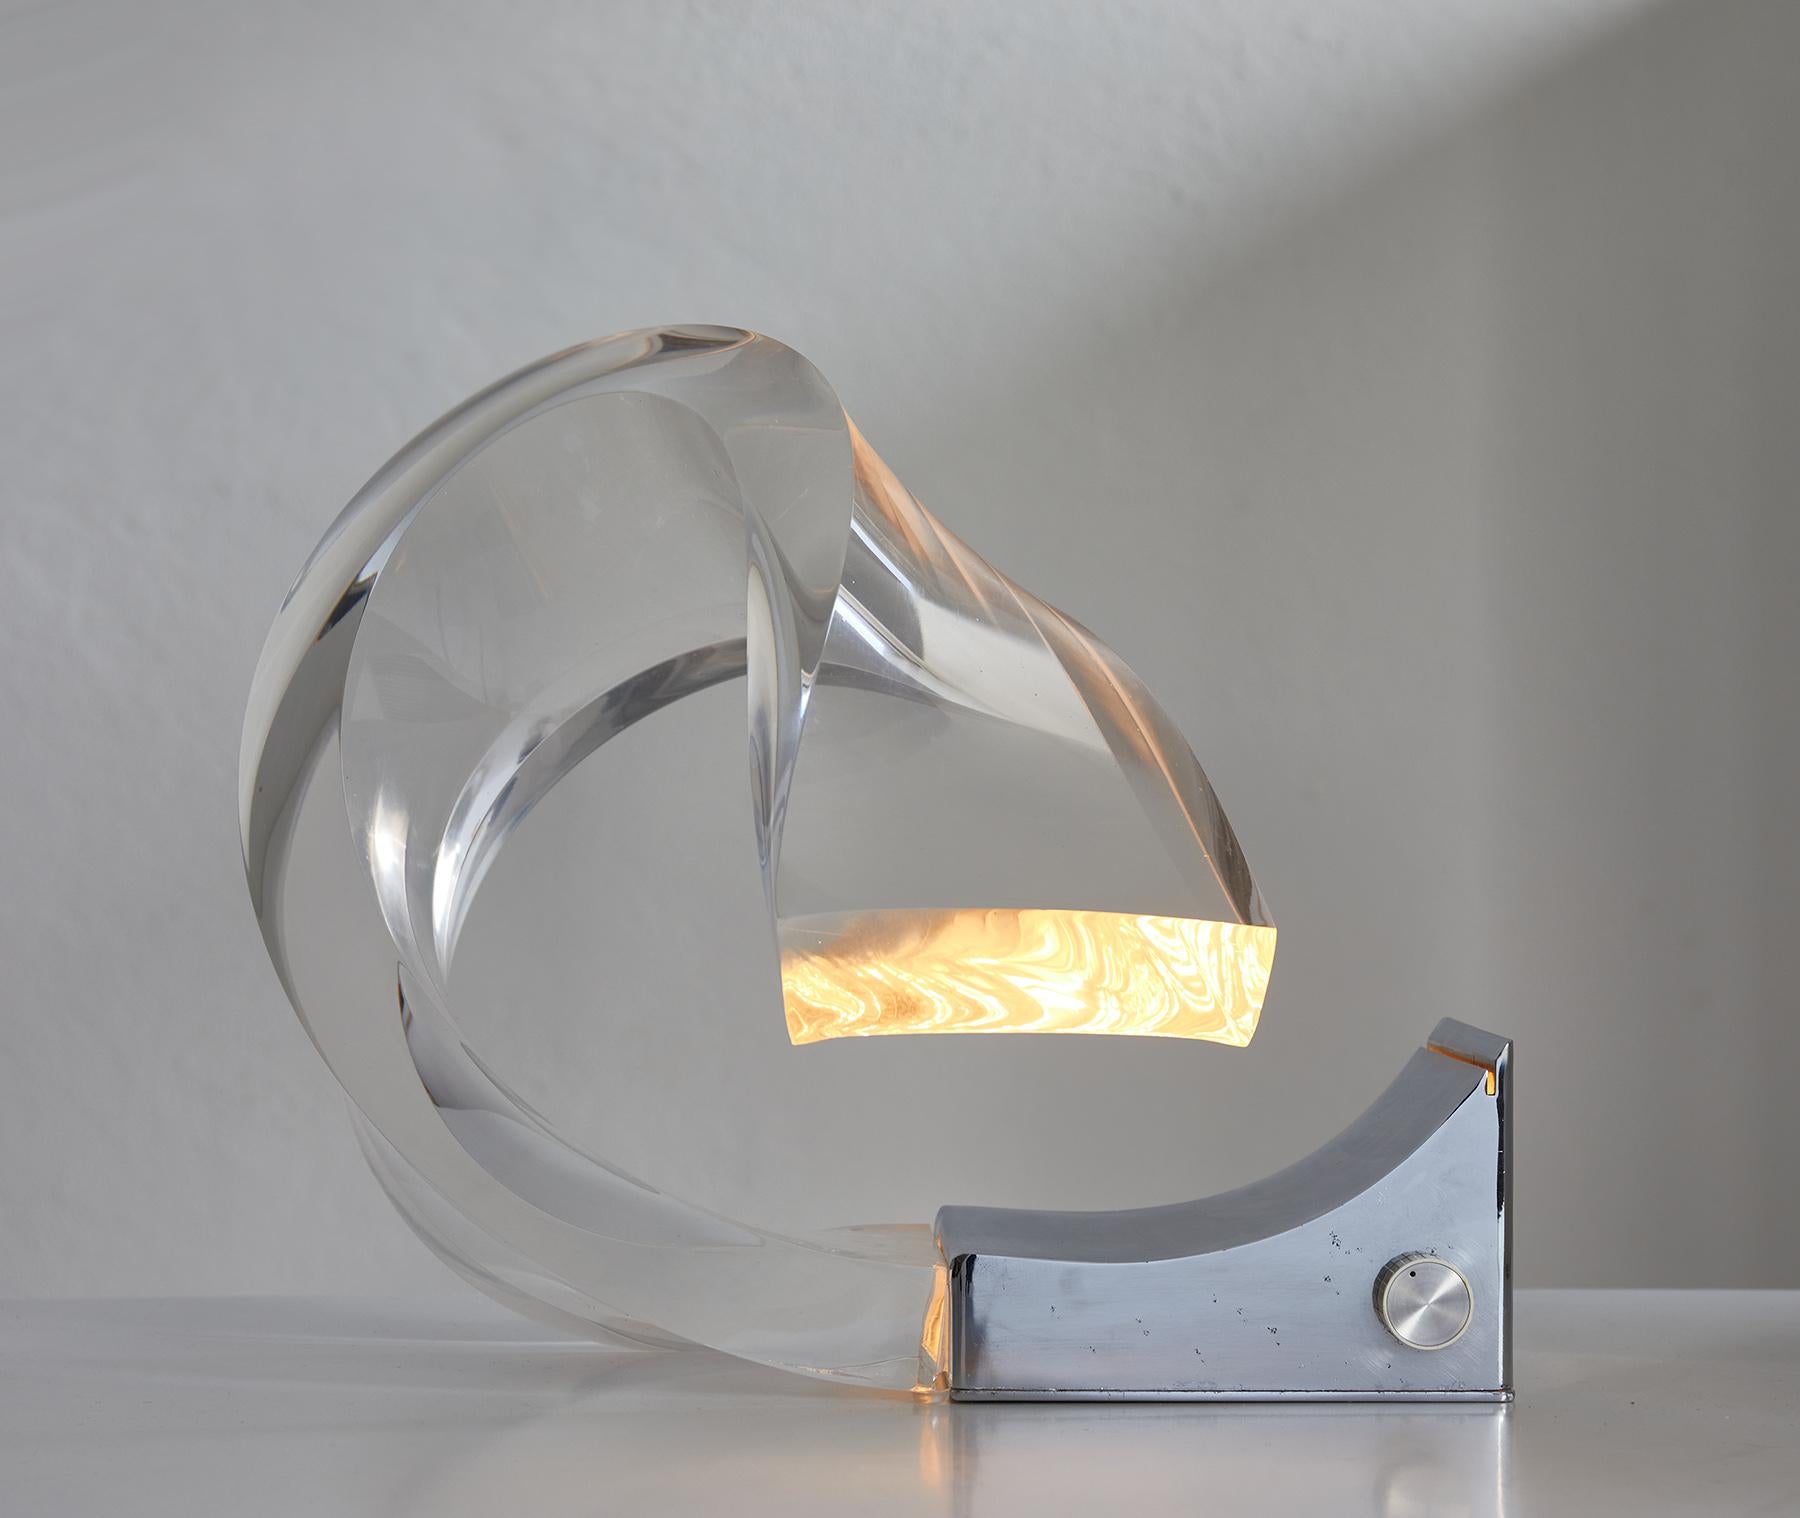 Wonderful table lamp by Gaetano Missaglia. Missaglia is an Italian designer known for his lighting sculptures in the wake of avant garde lighting designs by New Lamp, Giacomo Benevelli or Giuseppe Ravasio.

The light source is situated at the inside